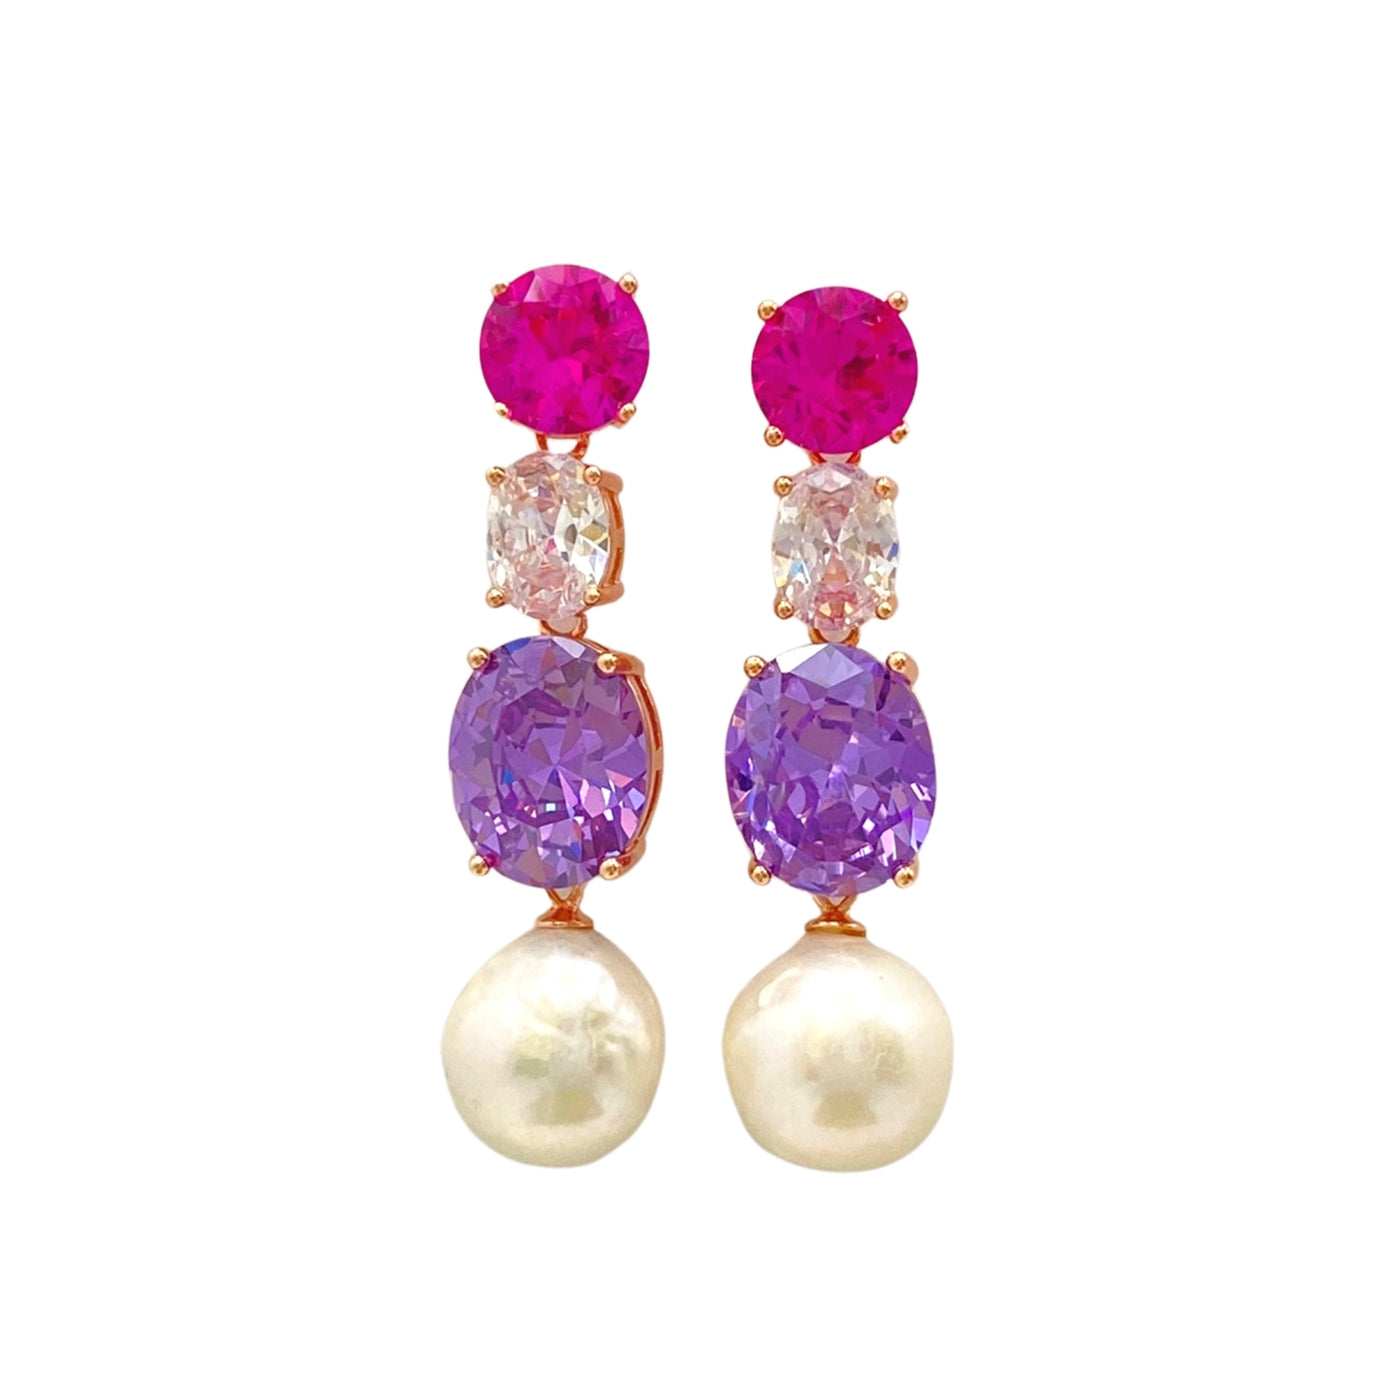 Silver drop earrings with baroque pearl